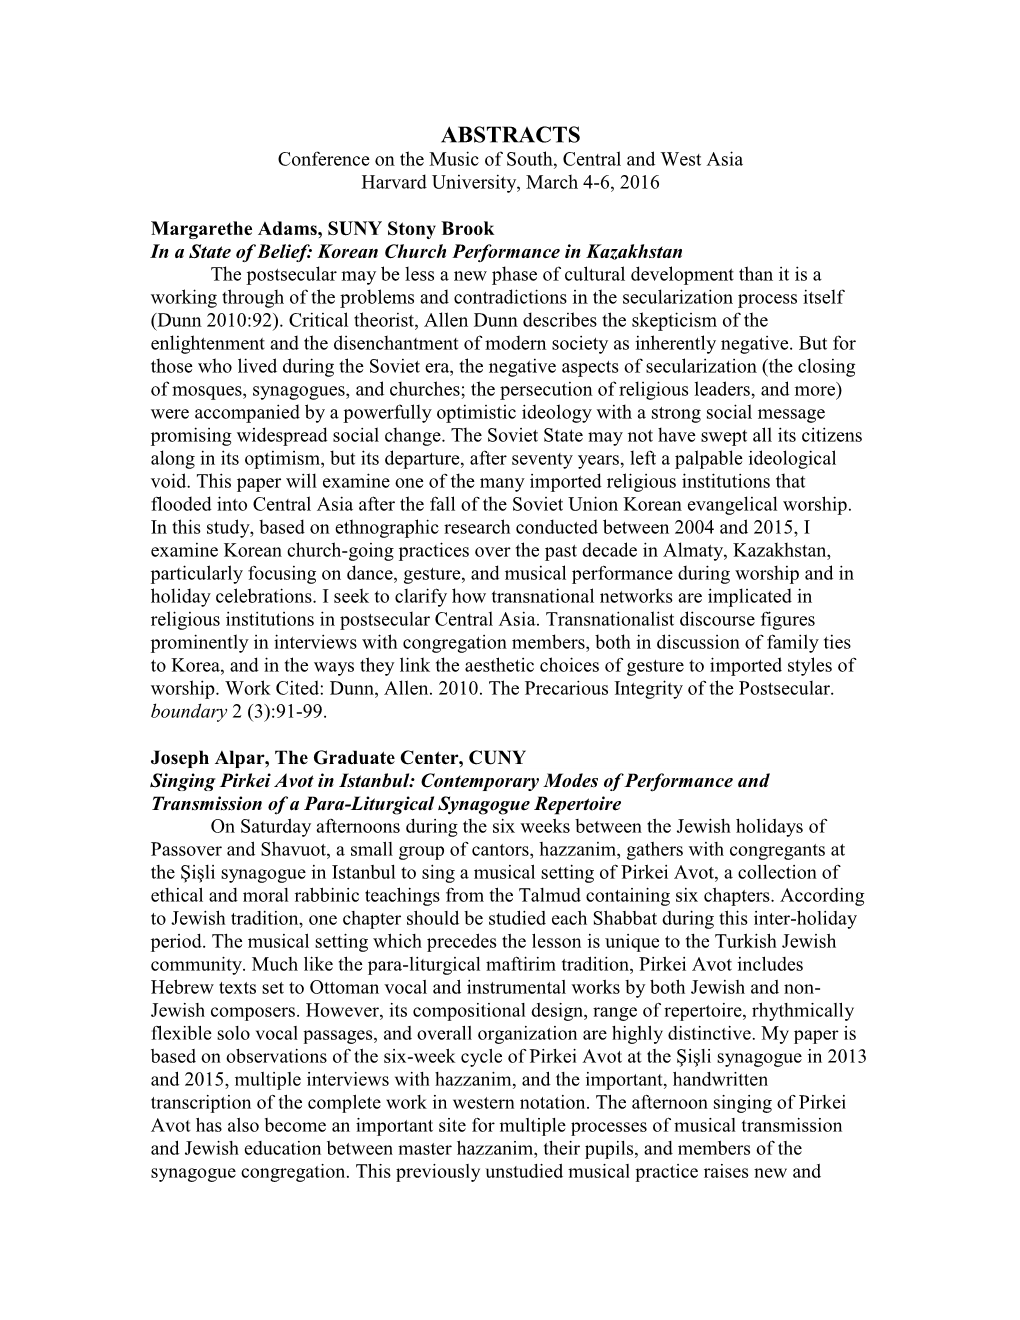 ABSTRACTS Conference on the Music of South, Central and West Asia Harvard University, March 4-6, 2016